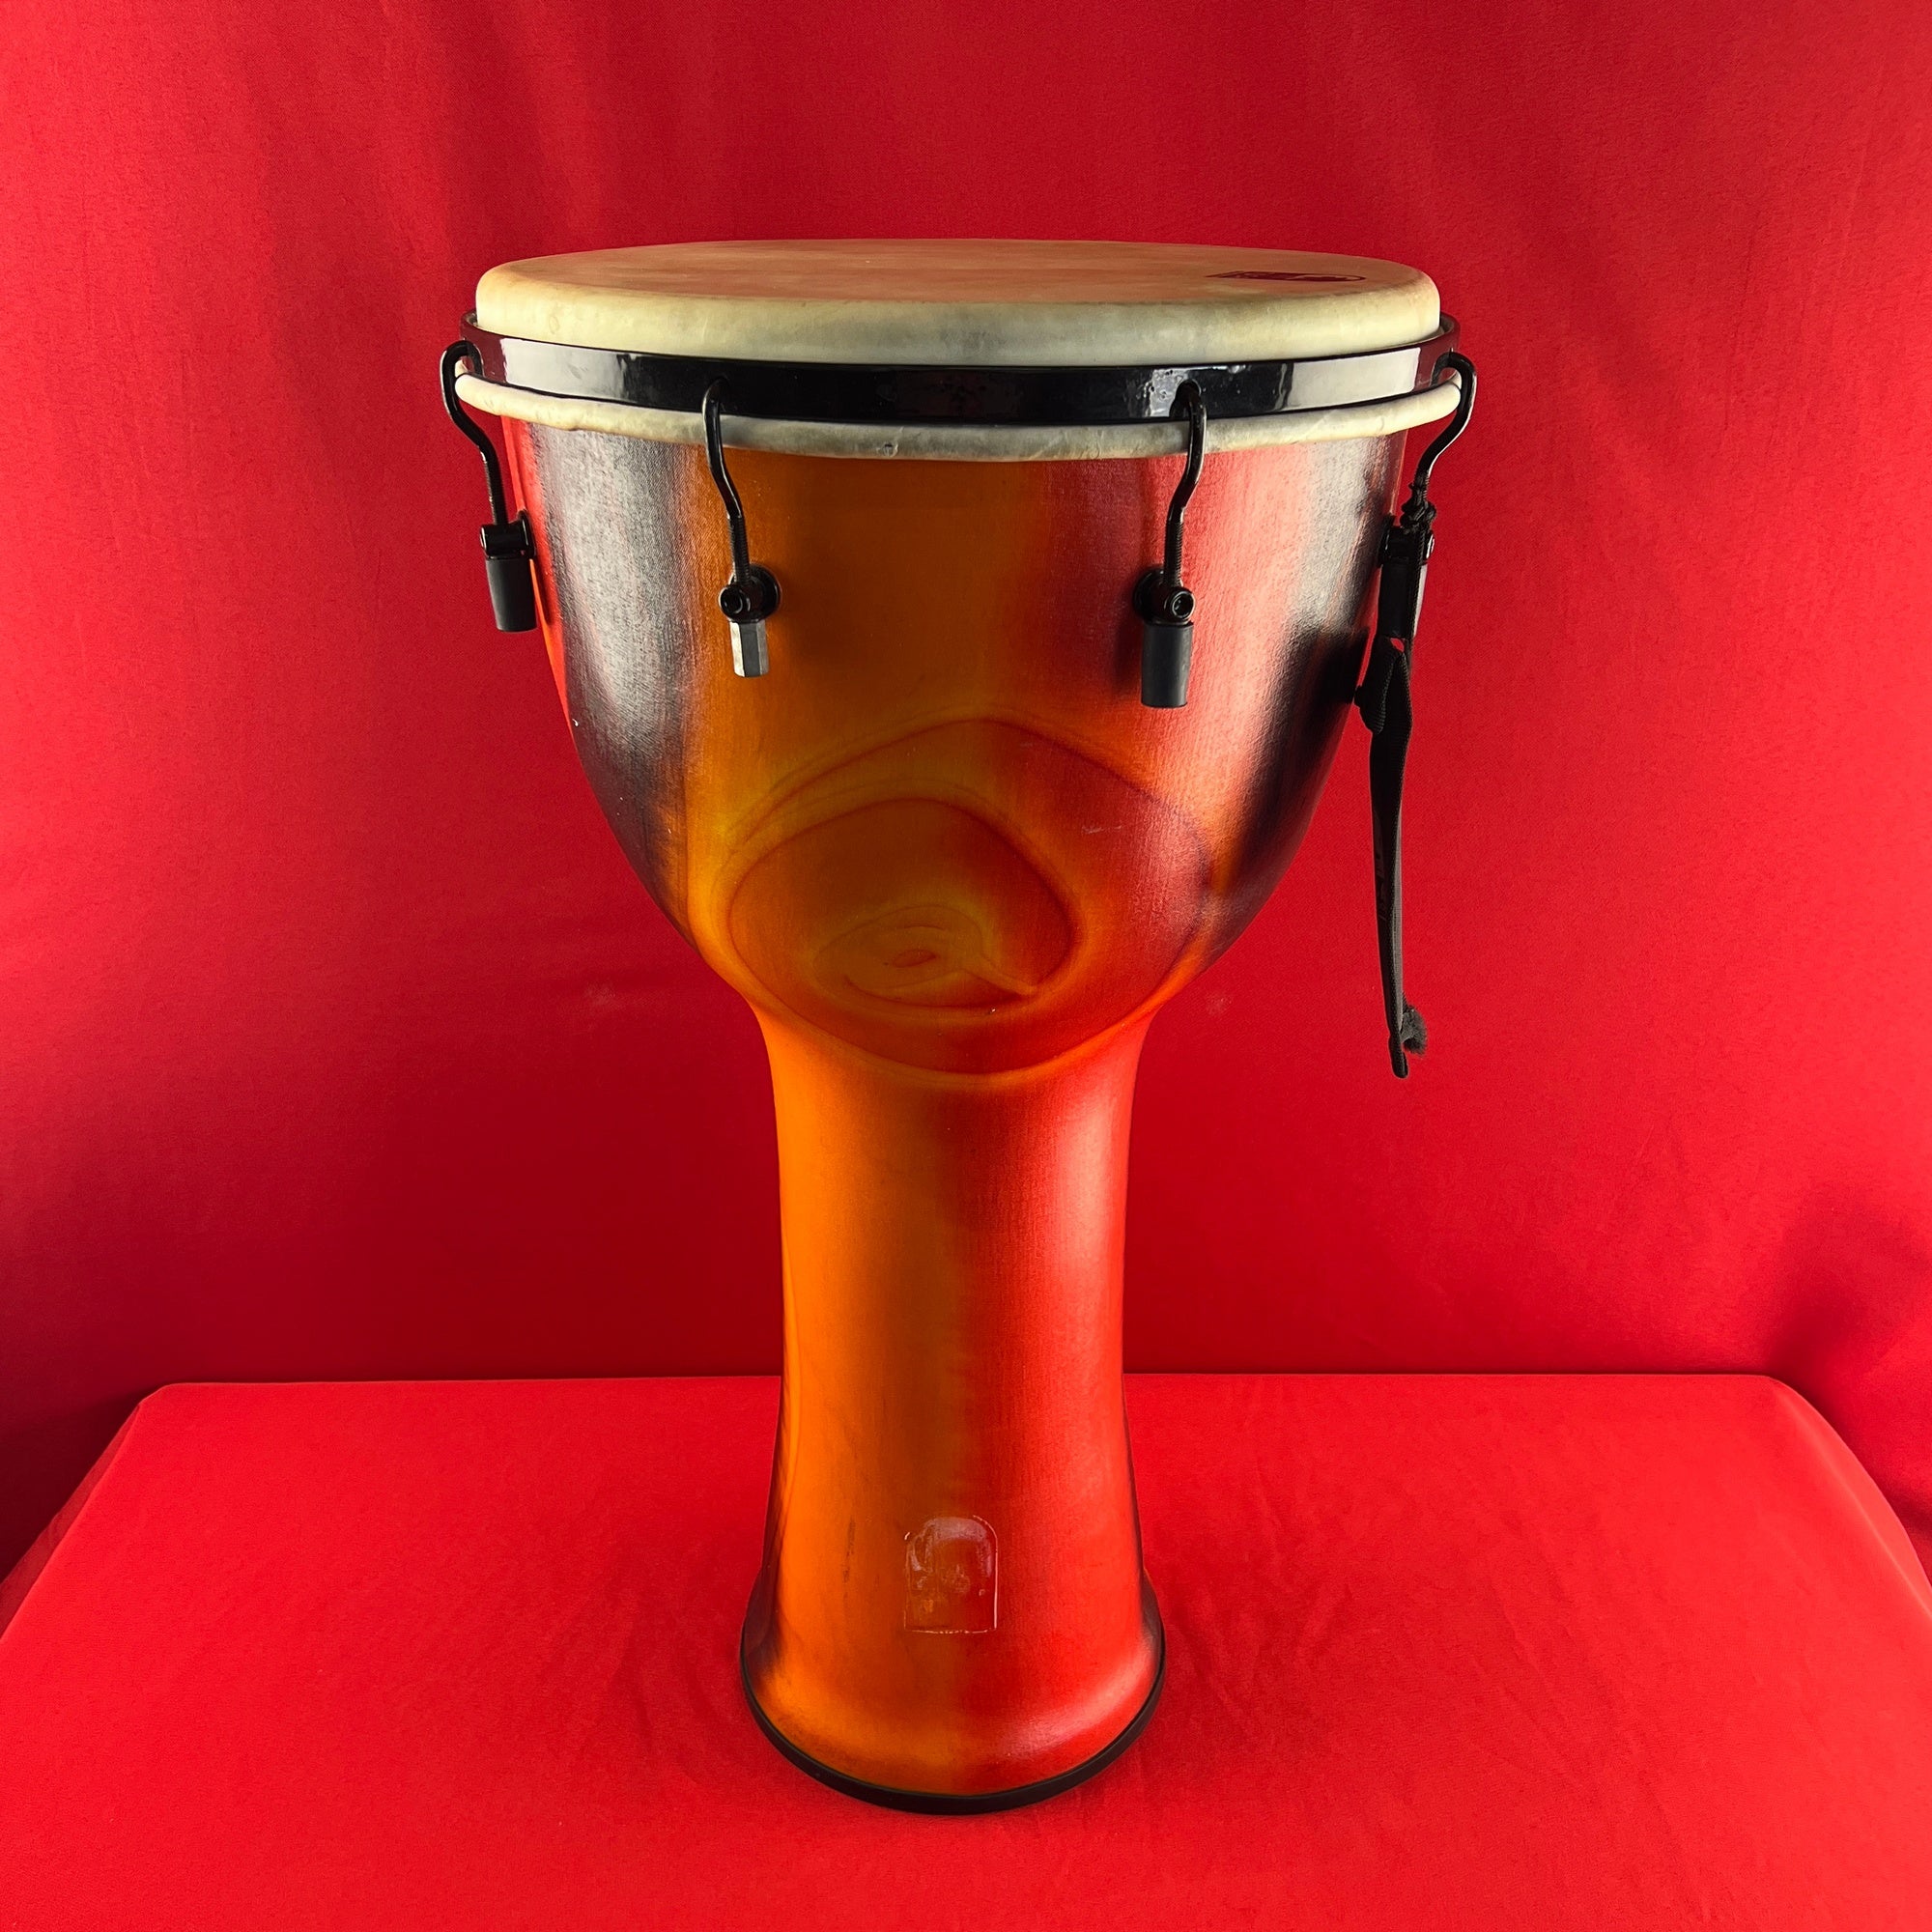 [USED] Toca SFDMX-14FB Mechanically Tuned 14-Inch Djembe w/Bag, Bali Red (See Description)